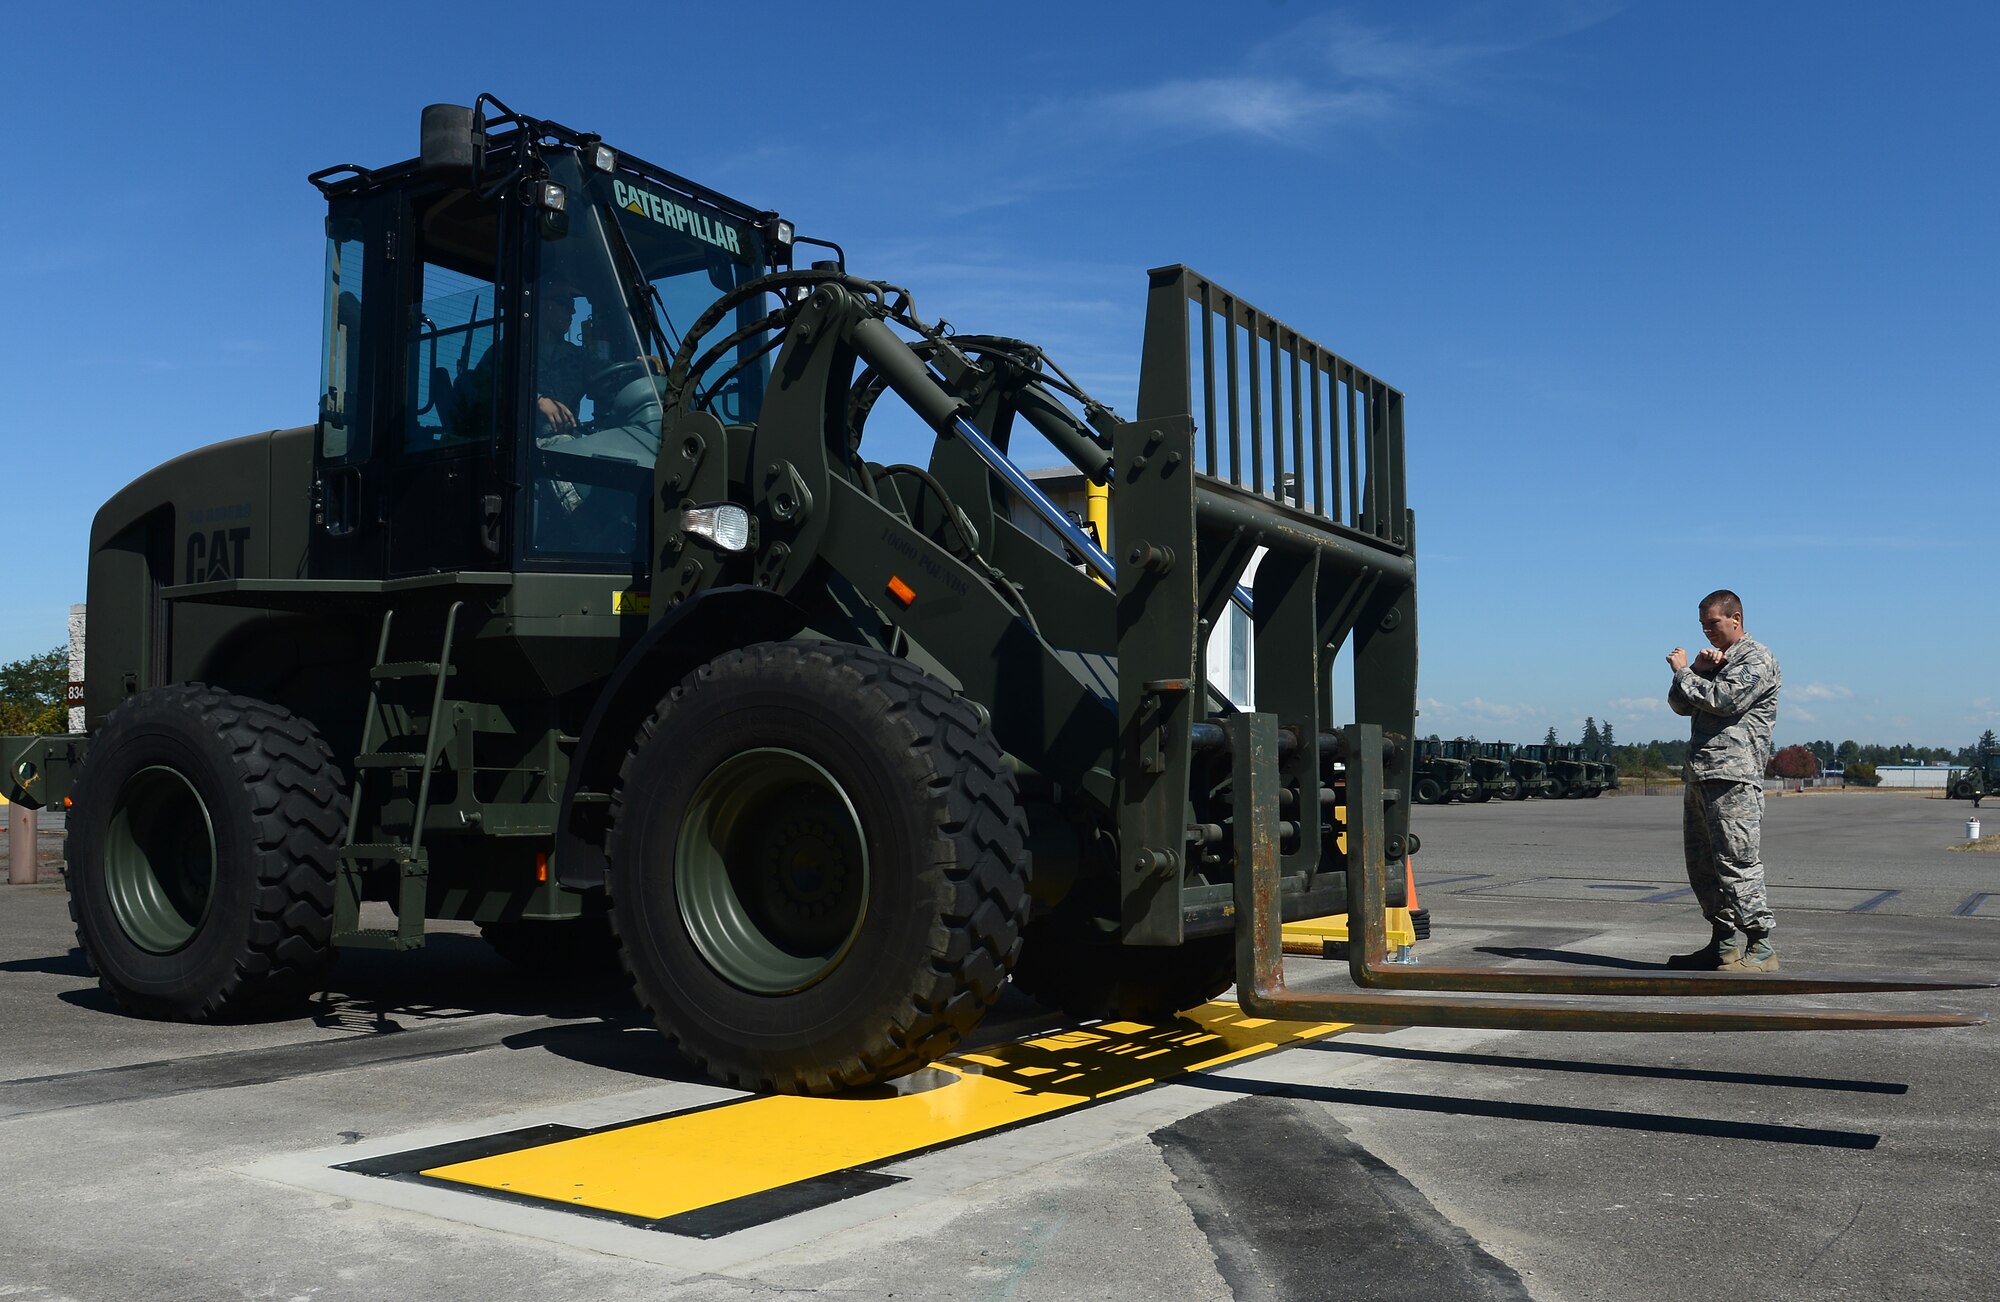 A forklift drives across a weigh-in-motion system Aug. 23, 2016 at Joint Base Lewis-McChord, Wash. The system, which consists of two laser-enabled reading posts and a digital floor-pad sensor, takes real-time and accurate measurements required for unit's automated load-planning systems. (U.S. Air Force photo/Senior Airman Divine Cox)